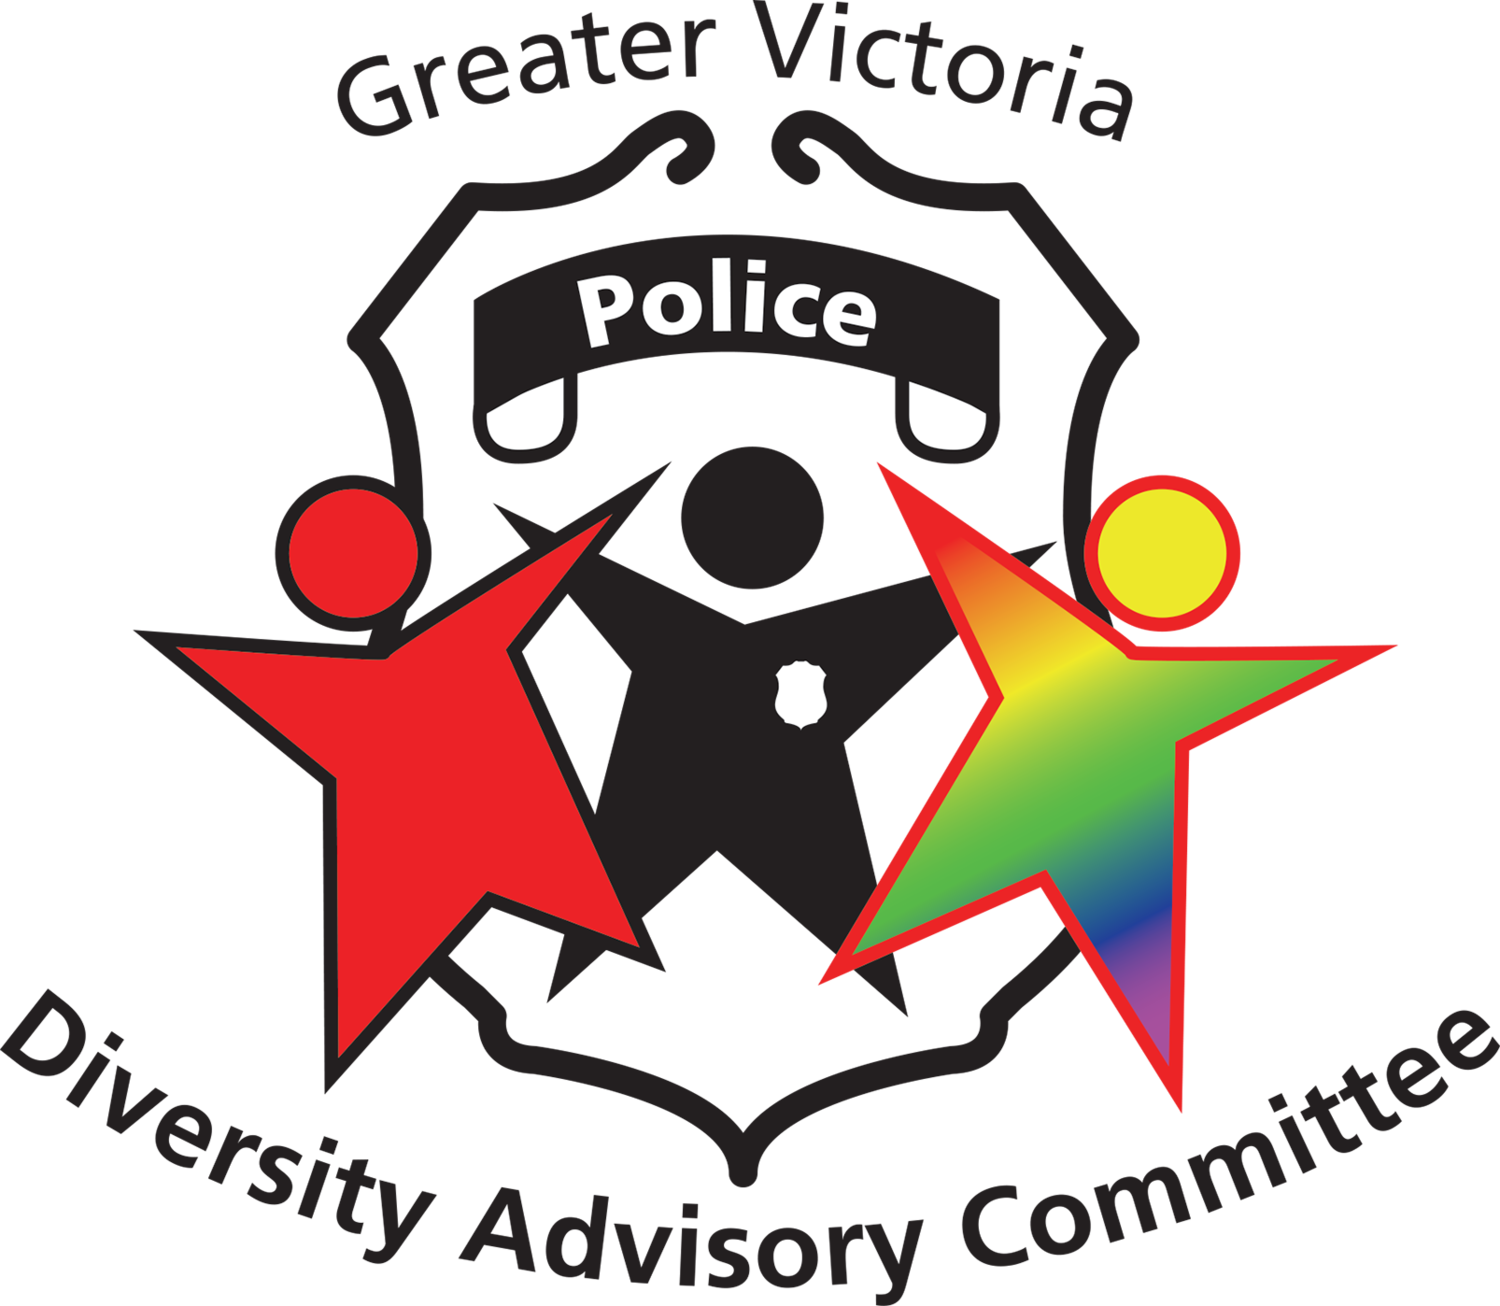 Greater Victoria Police Diversity Advisory Committee